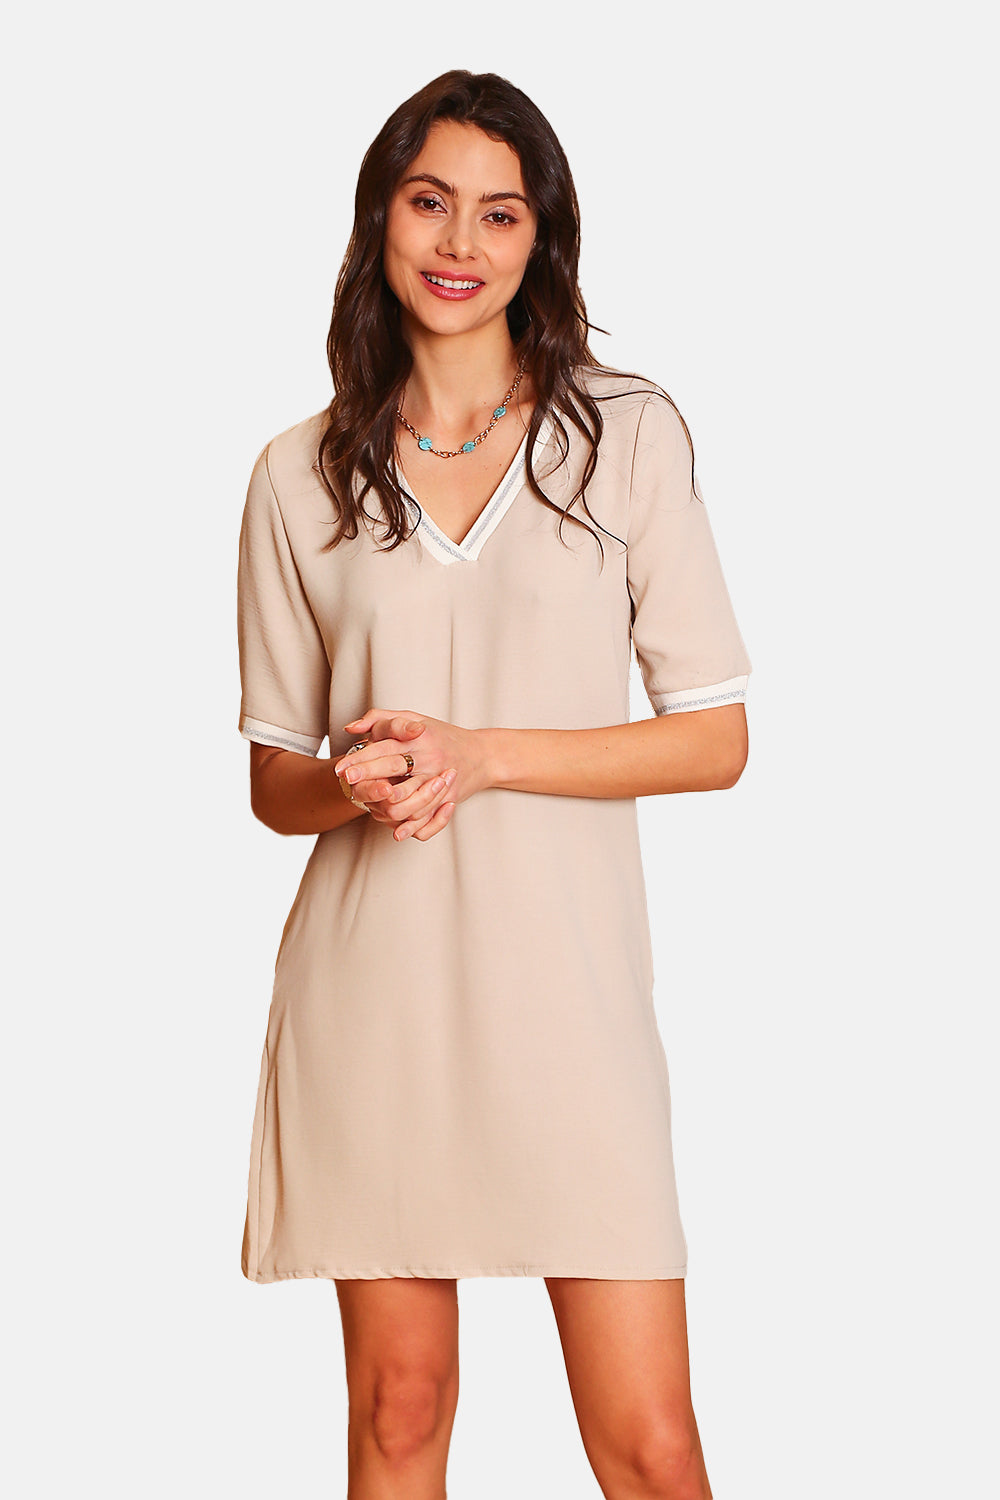 Fancy bicolor V-cross dress with 3/4 sleeves